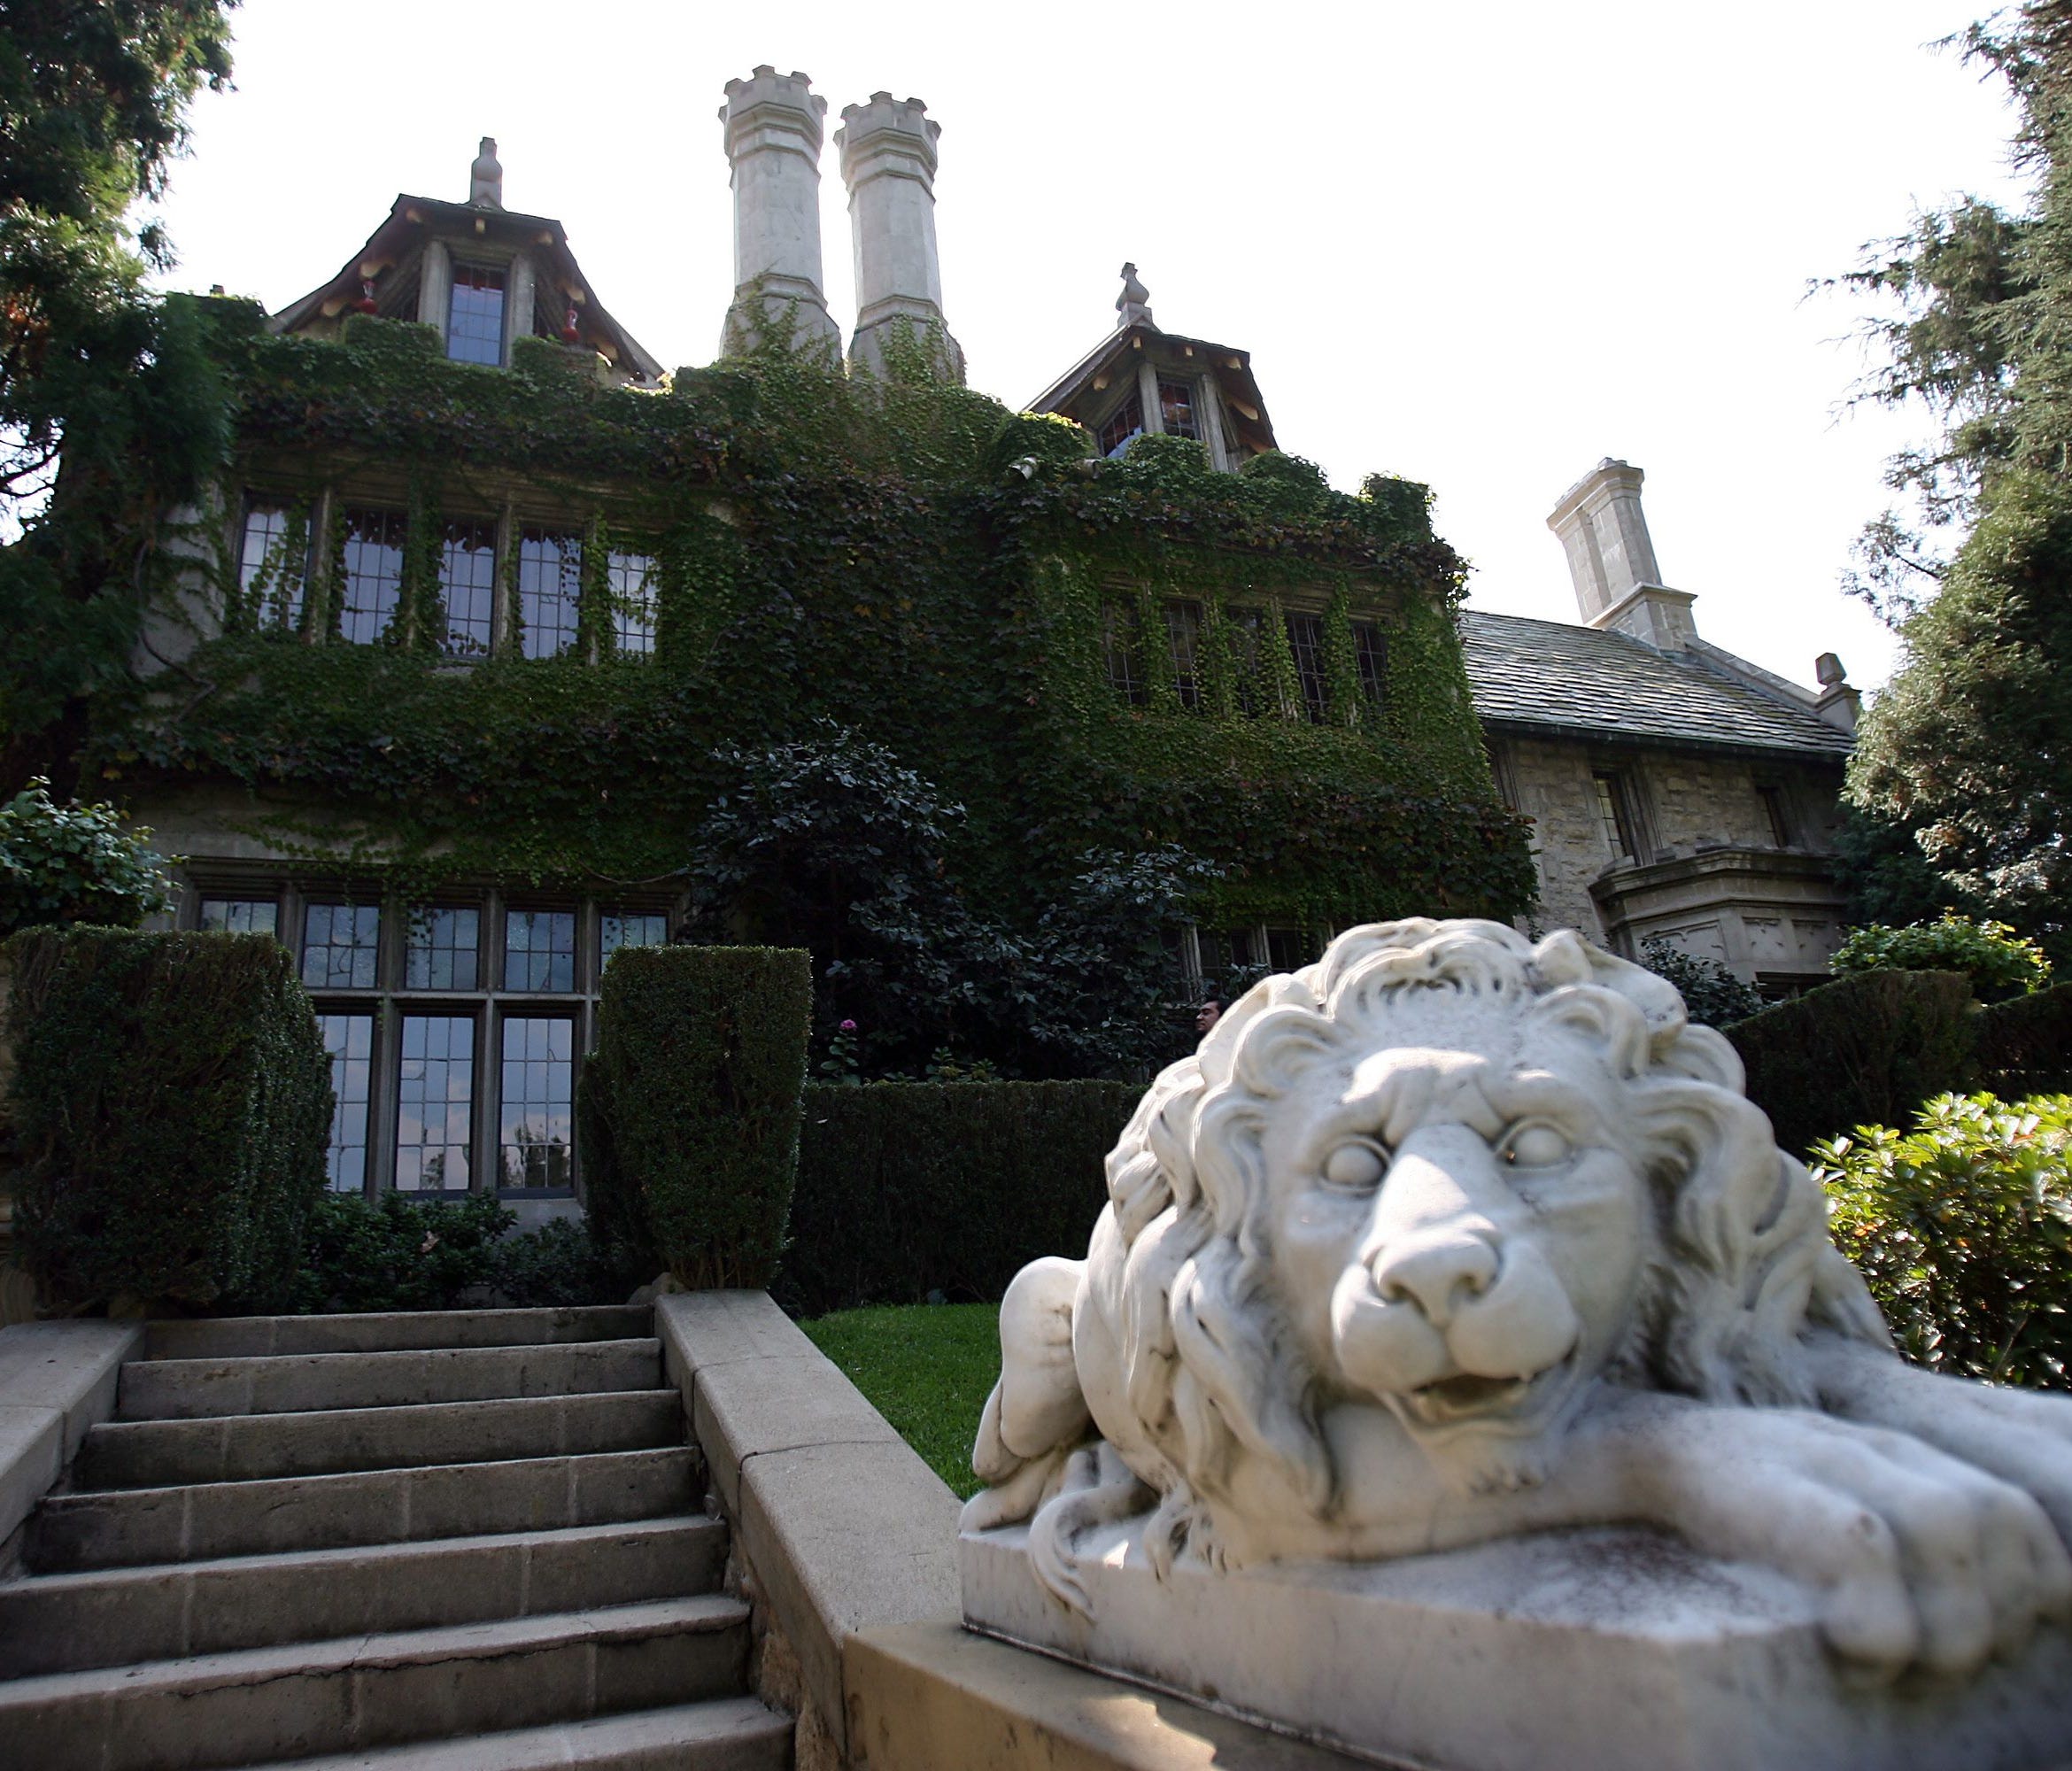 File photo taken in 2006 shows the Playboy Mansion the palatial Los Angeles property that was long  was home to Playboy magazine founder Hugh Hefner.